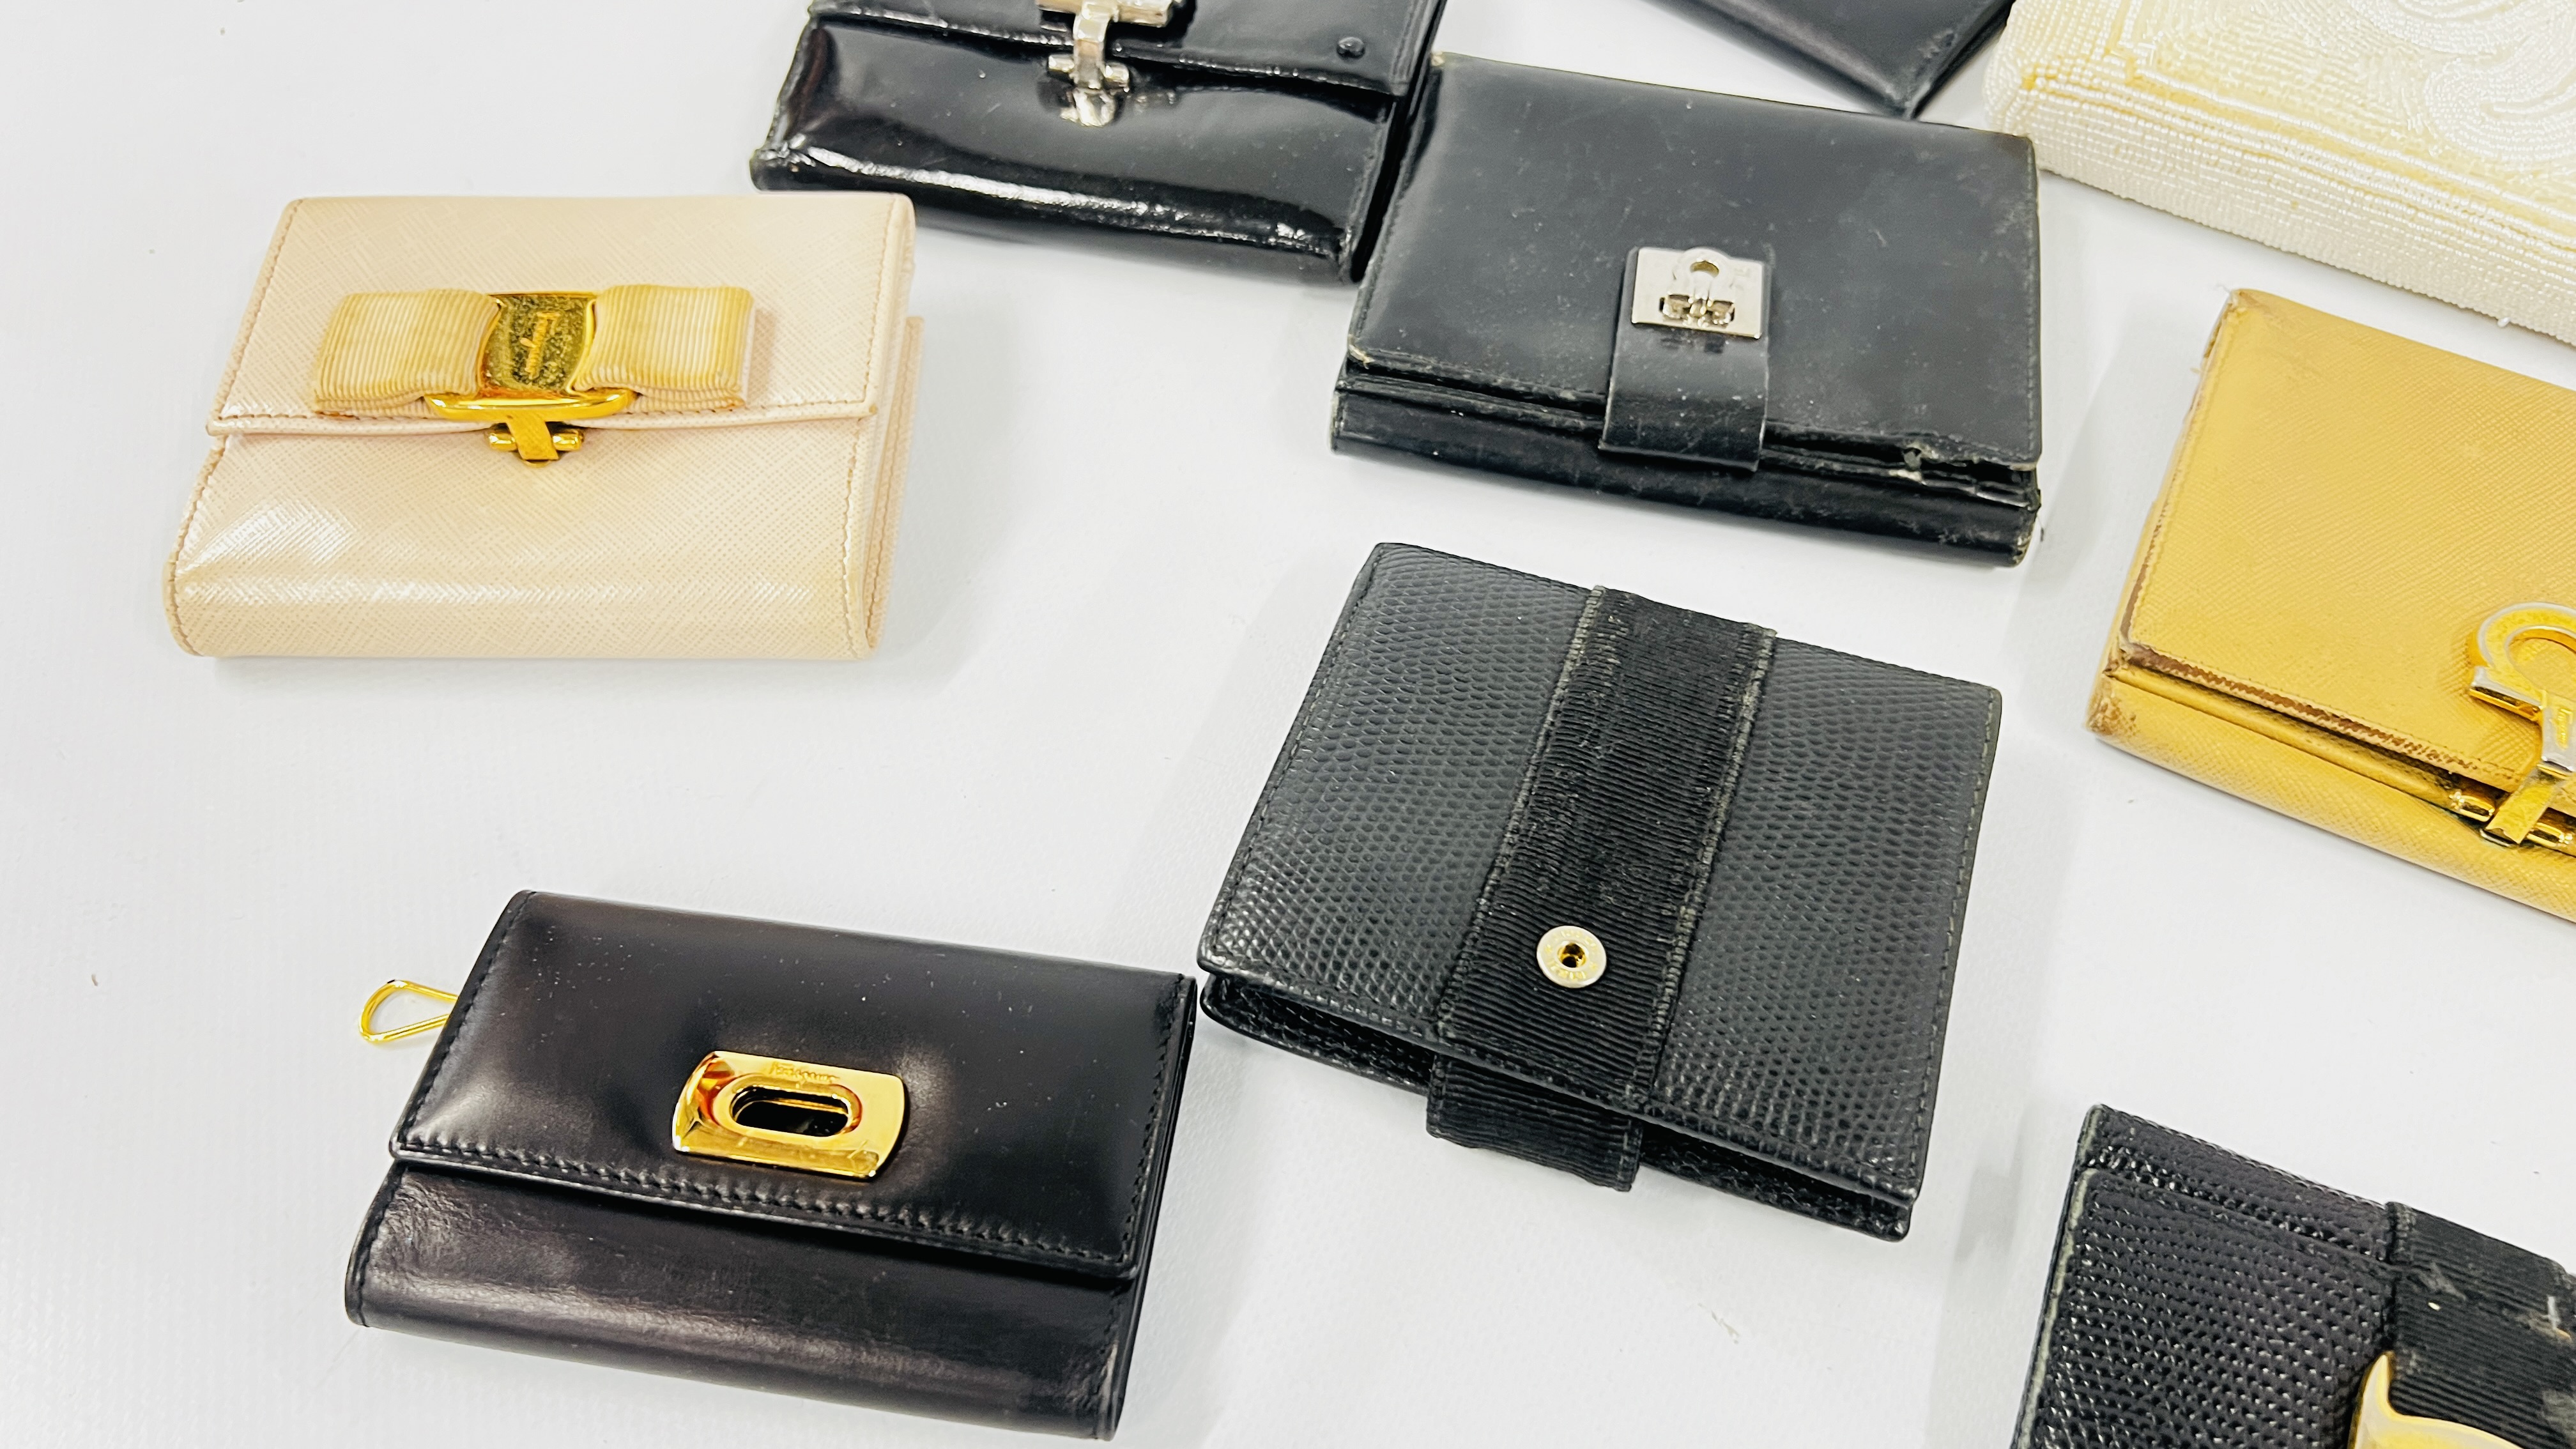 A COLLECTION OF 18 DESIGNER PURSES AND KEY HOLDERS MARKED "SALVADOR FERRAGAMA" + A FURTHER - Image 5 of 7